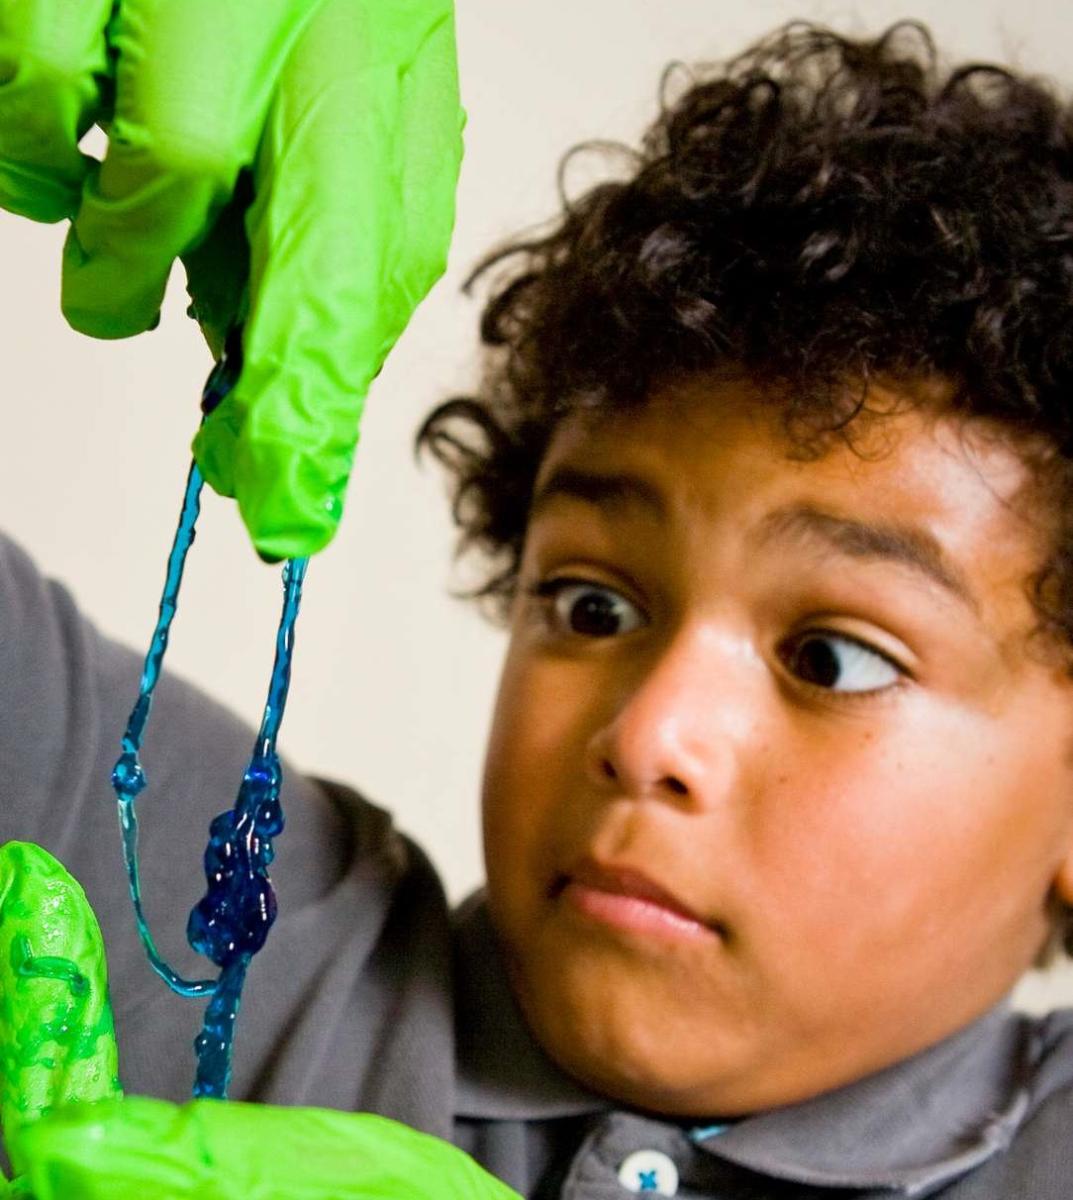 learner with green gloves holds a string of blue slime